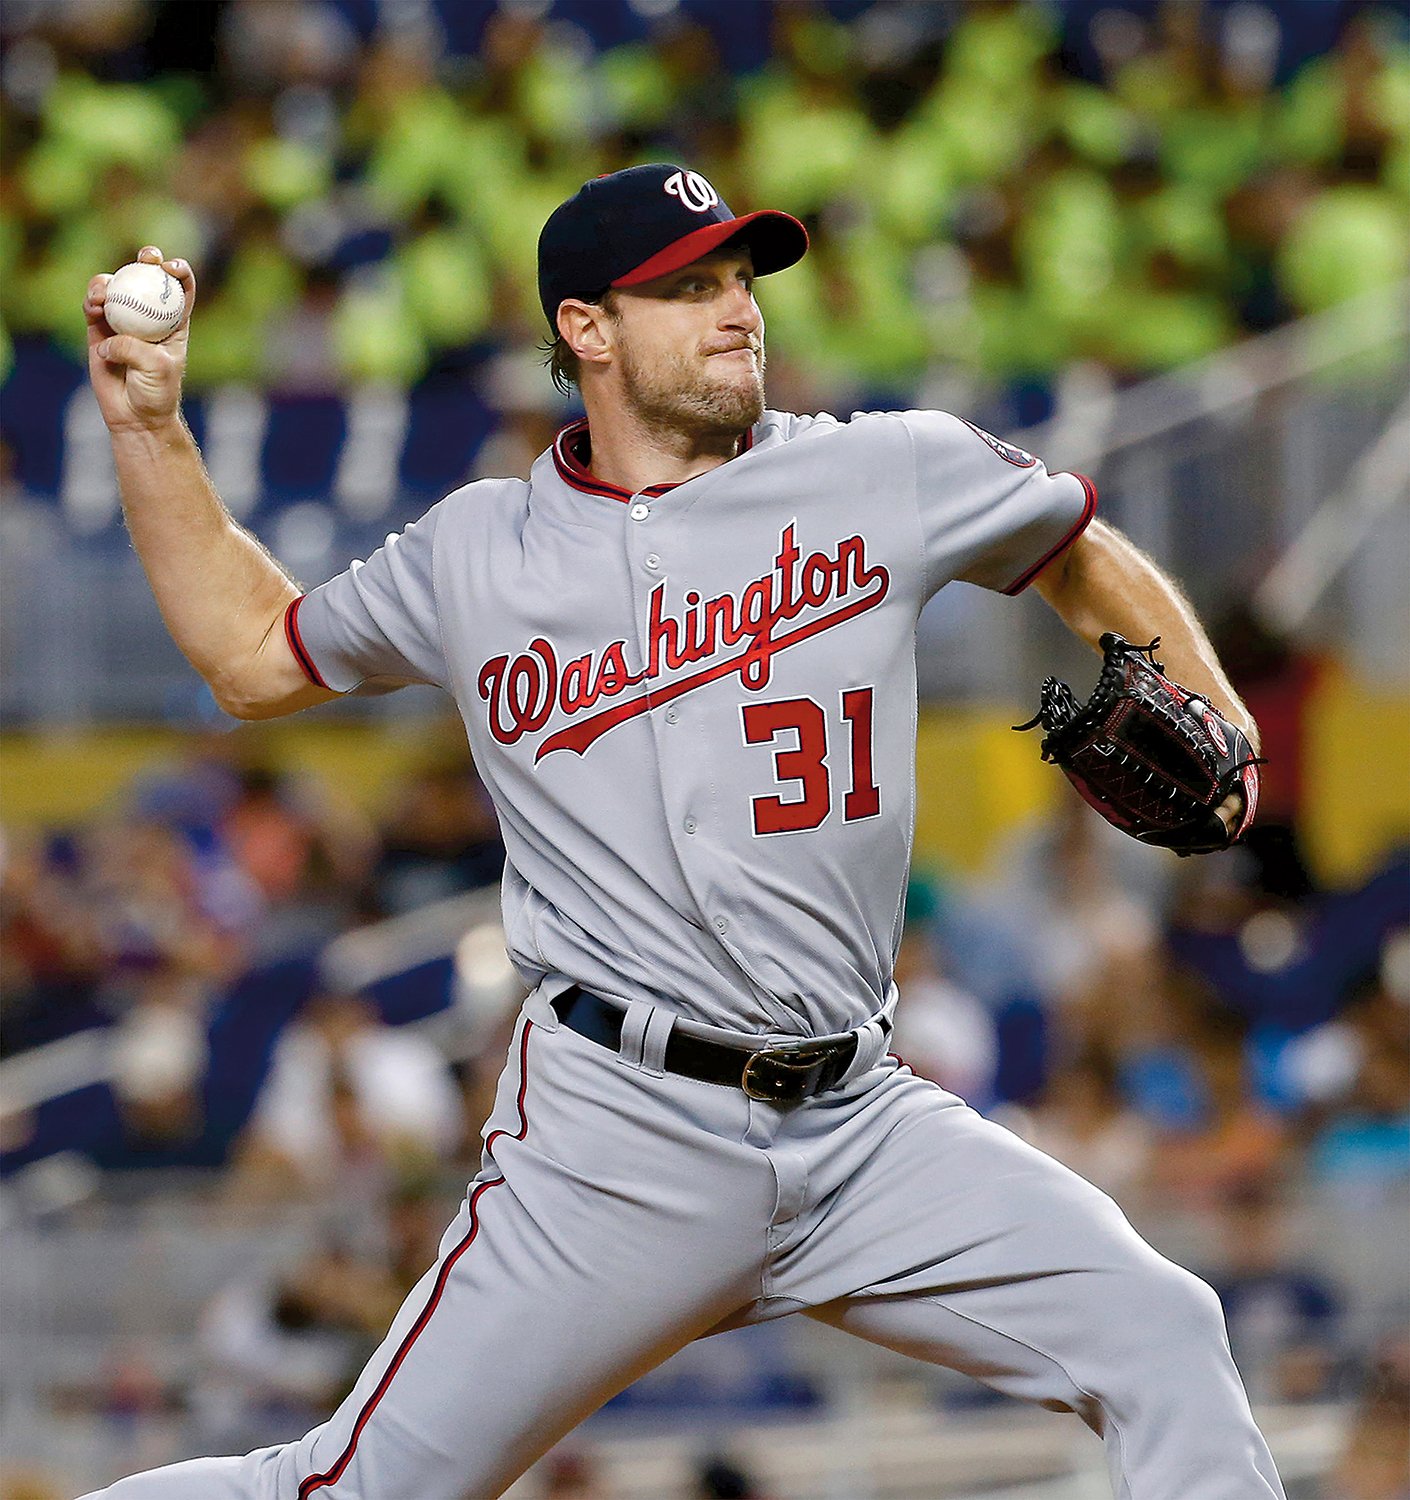 Nats ace Max Scherzer, the starting National League pitcher in last year’s All-Star Game. Photograph of Scherzer by David Santiago/el Nuevo Herald/TNS/Alamy Live News.